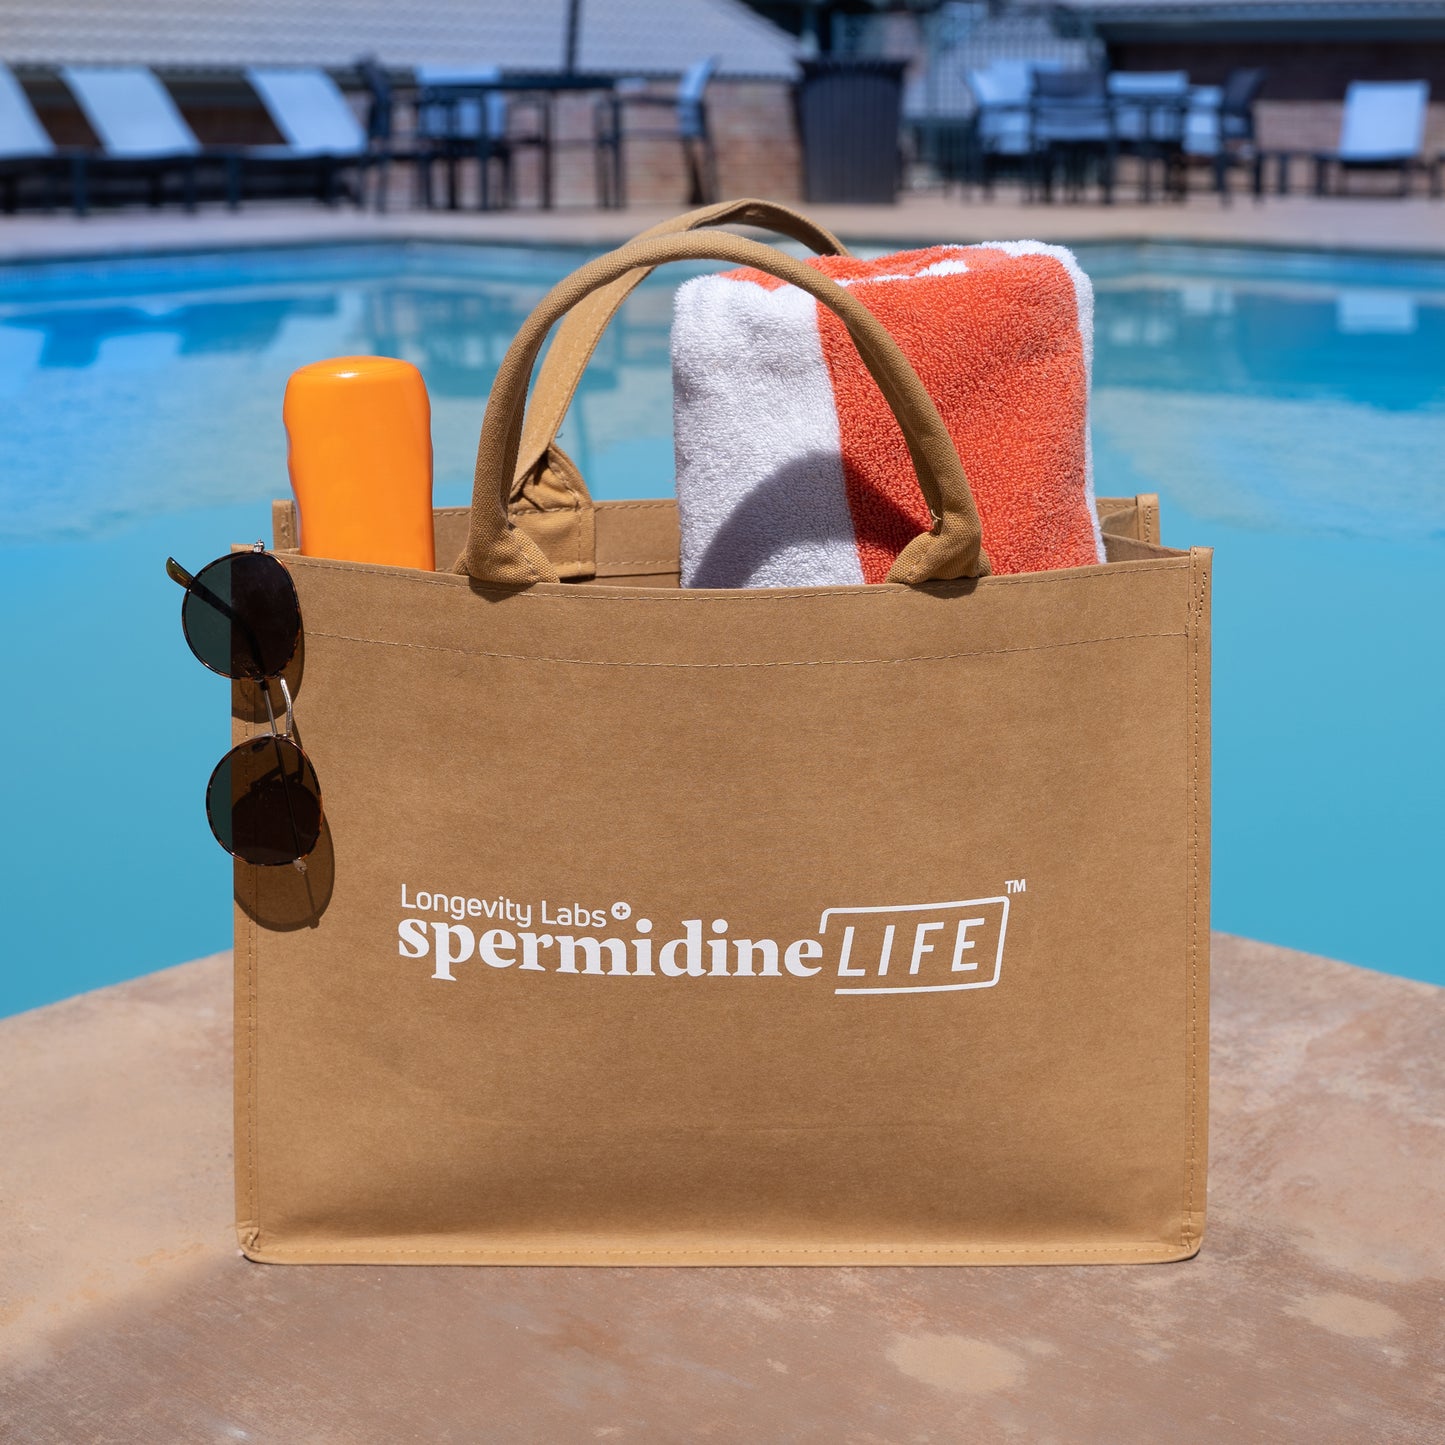 spermidineLIFE earth day washable paper tote